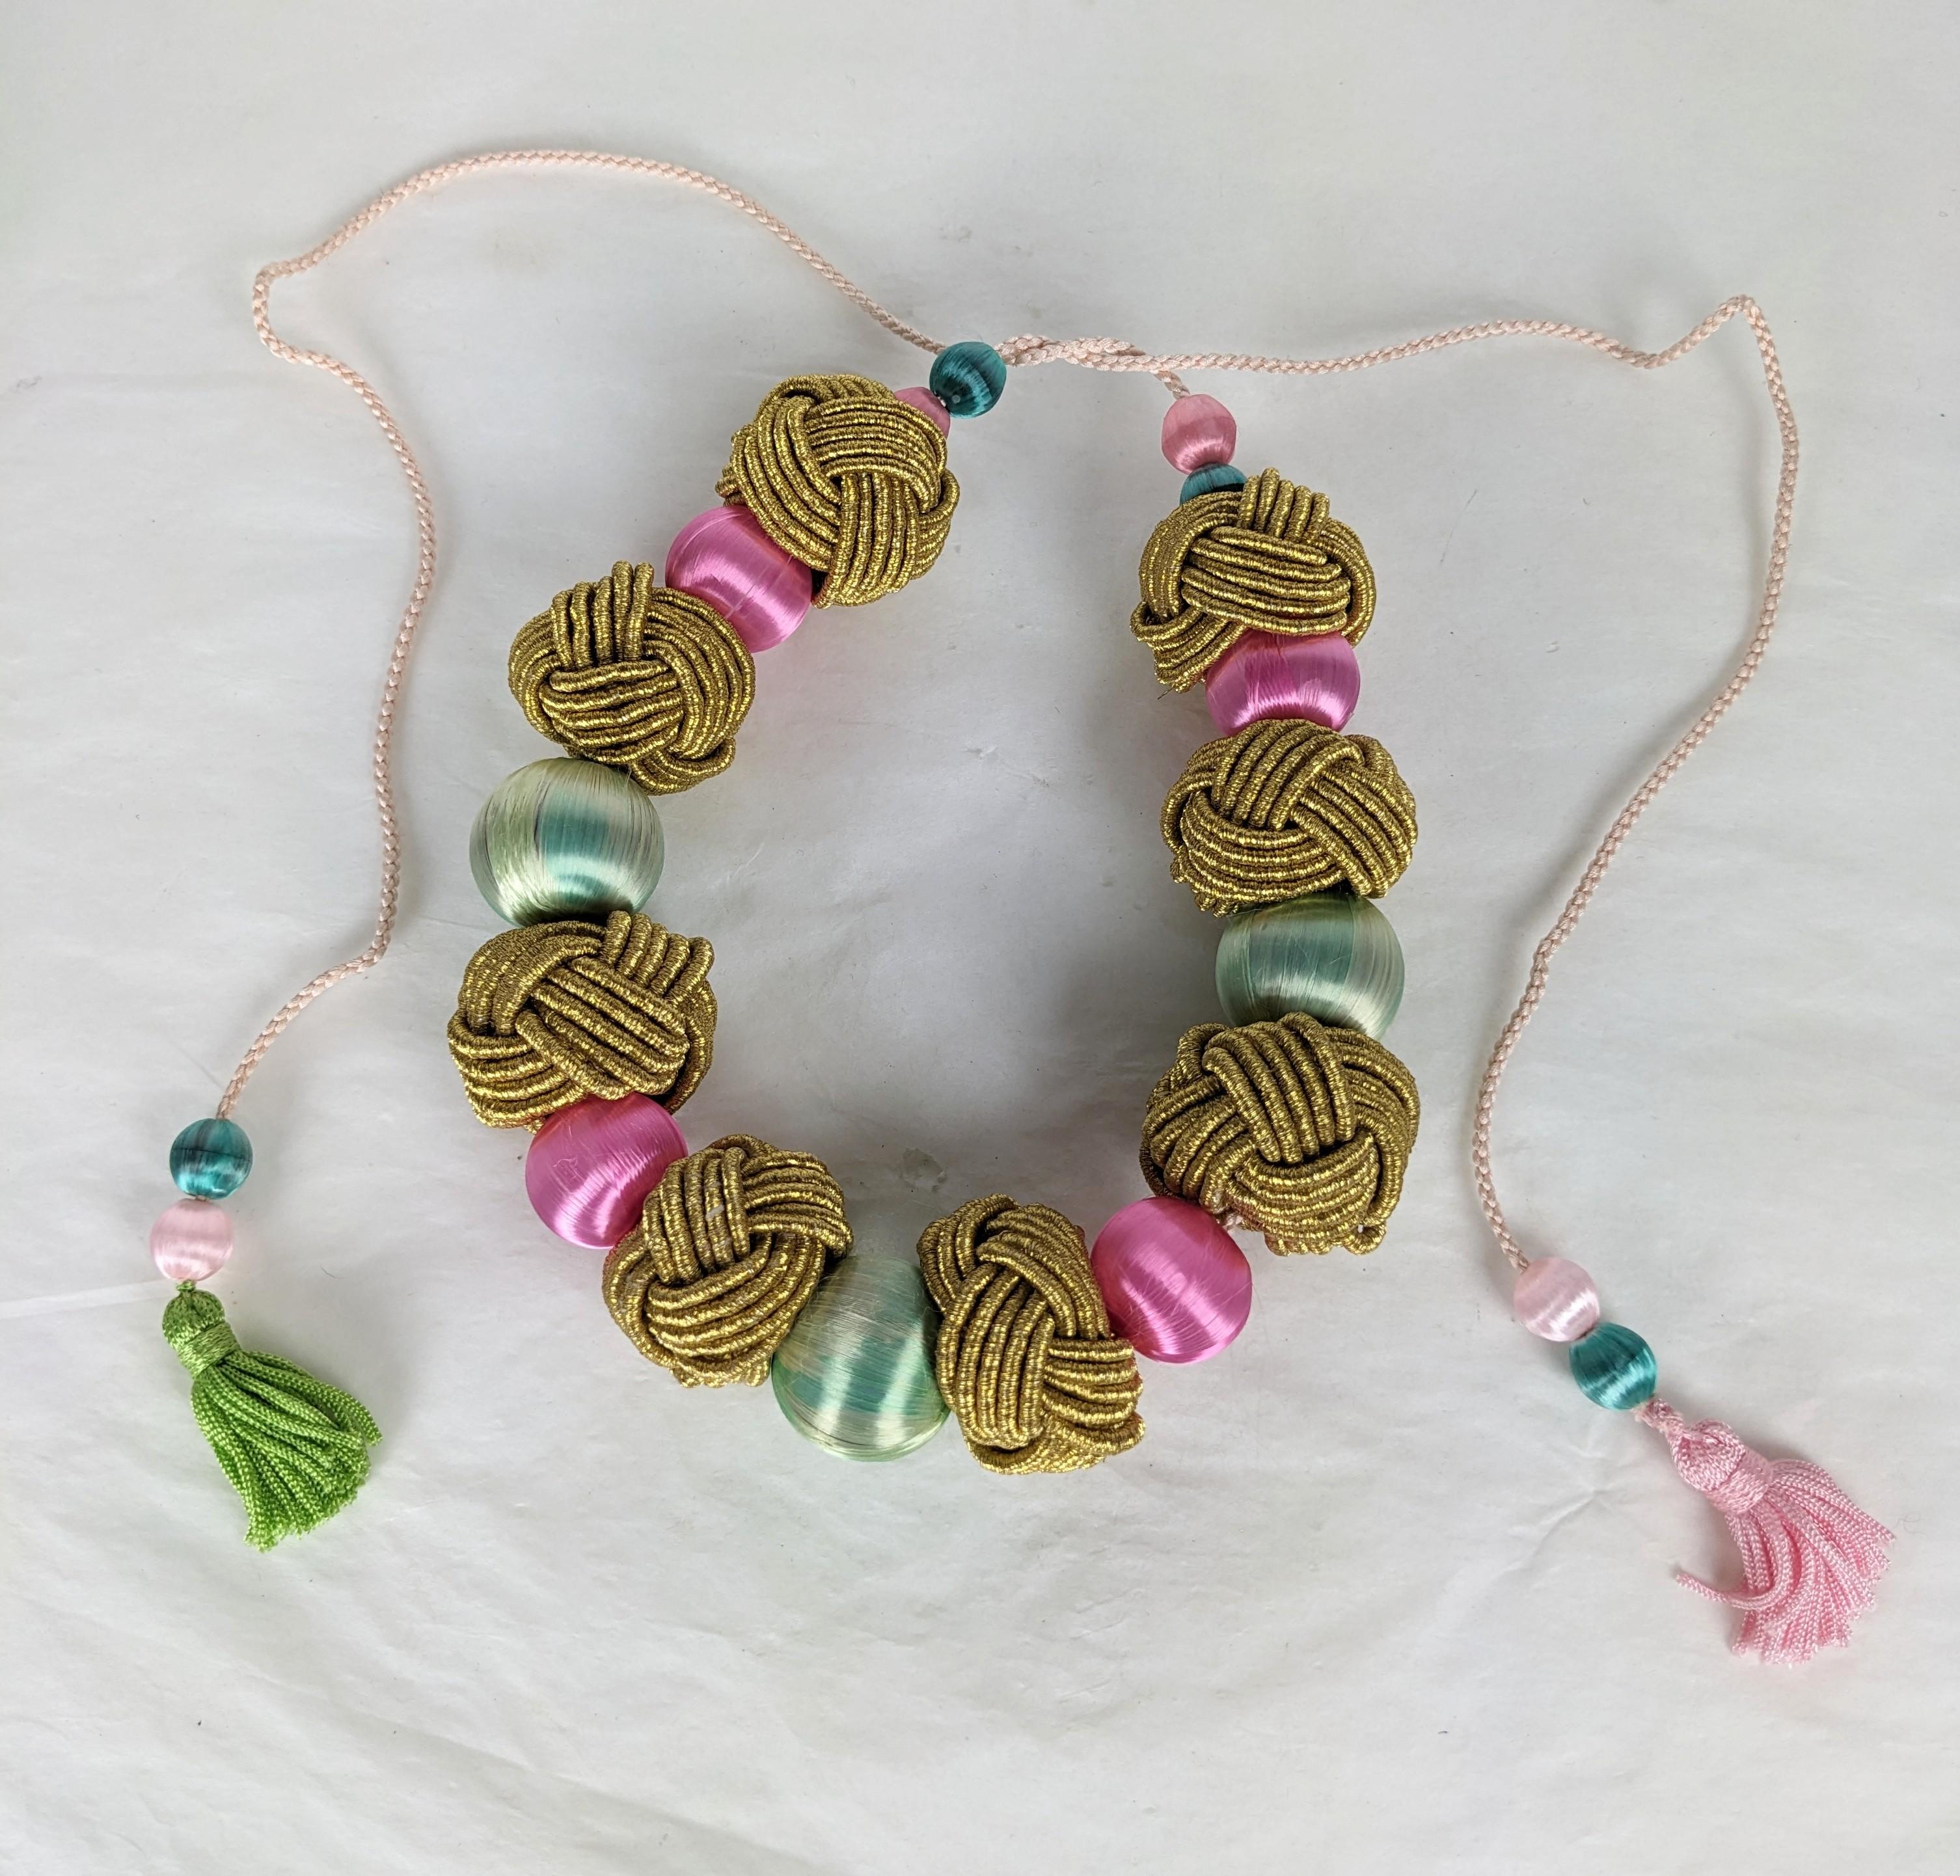 Yves Saint Laurent lavish Haute Couture  Passementerie Necklace, Fall Winter 1977, Chinese Opium Collection. Composed of silk cord with tassel ends. Gilt chinese passementrie knots, silk sateen large and small beads beads  imitating pale jade and